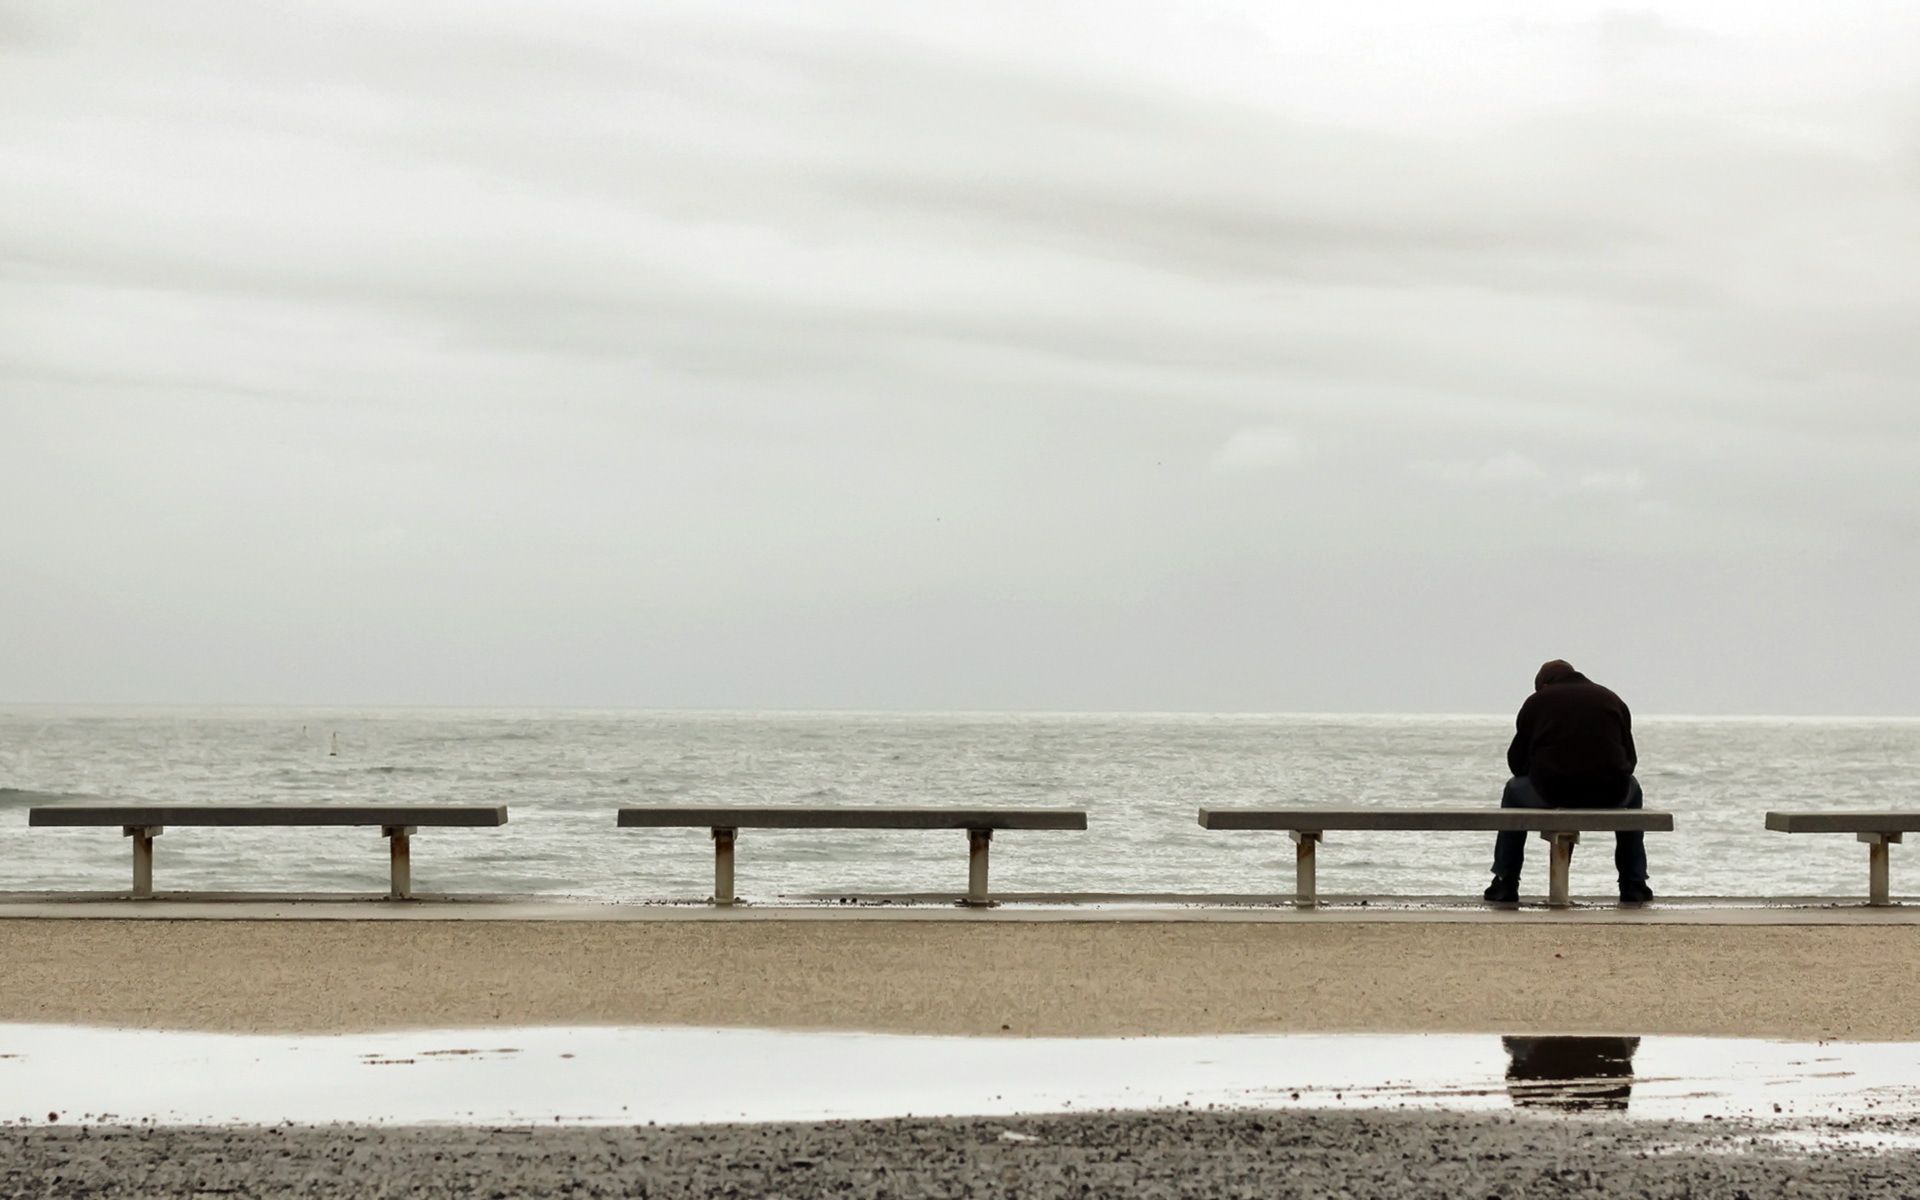 Bench, Lonely man, Loneliness wallpaper and image, picture, photo